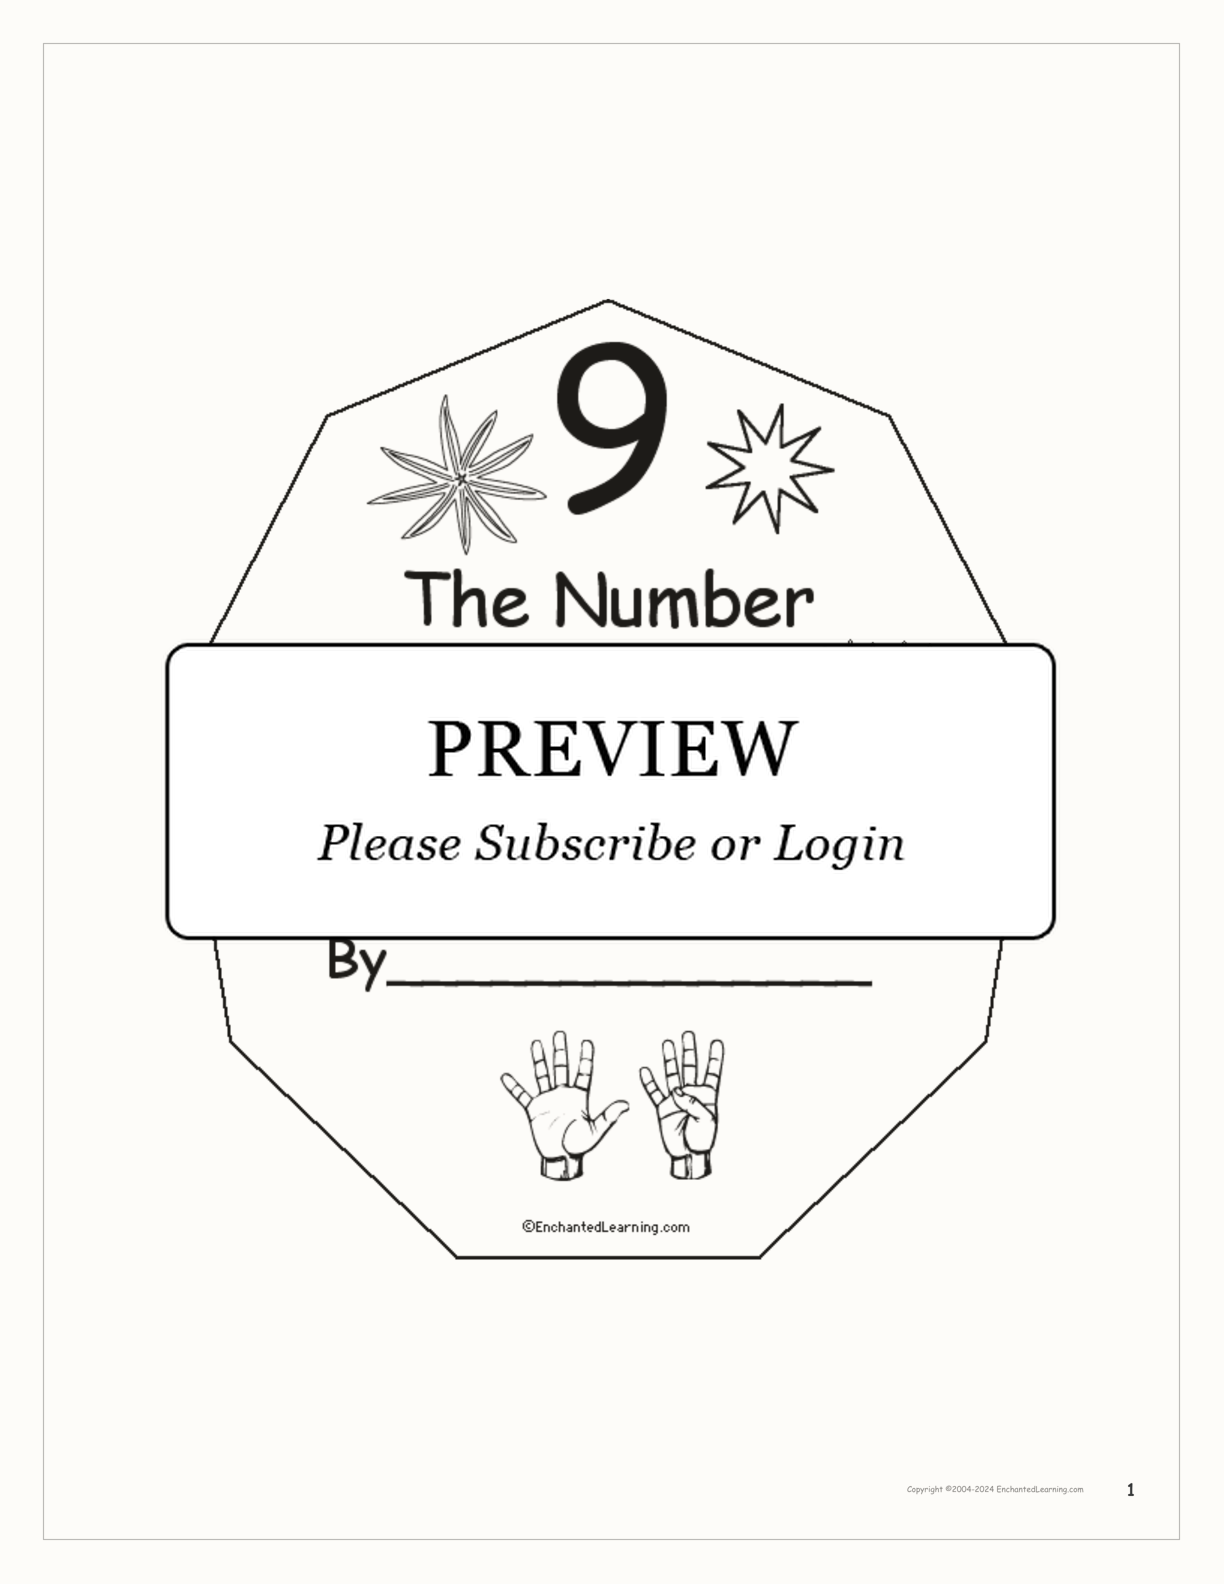 The Number Nine Book interactive printout page 1